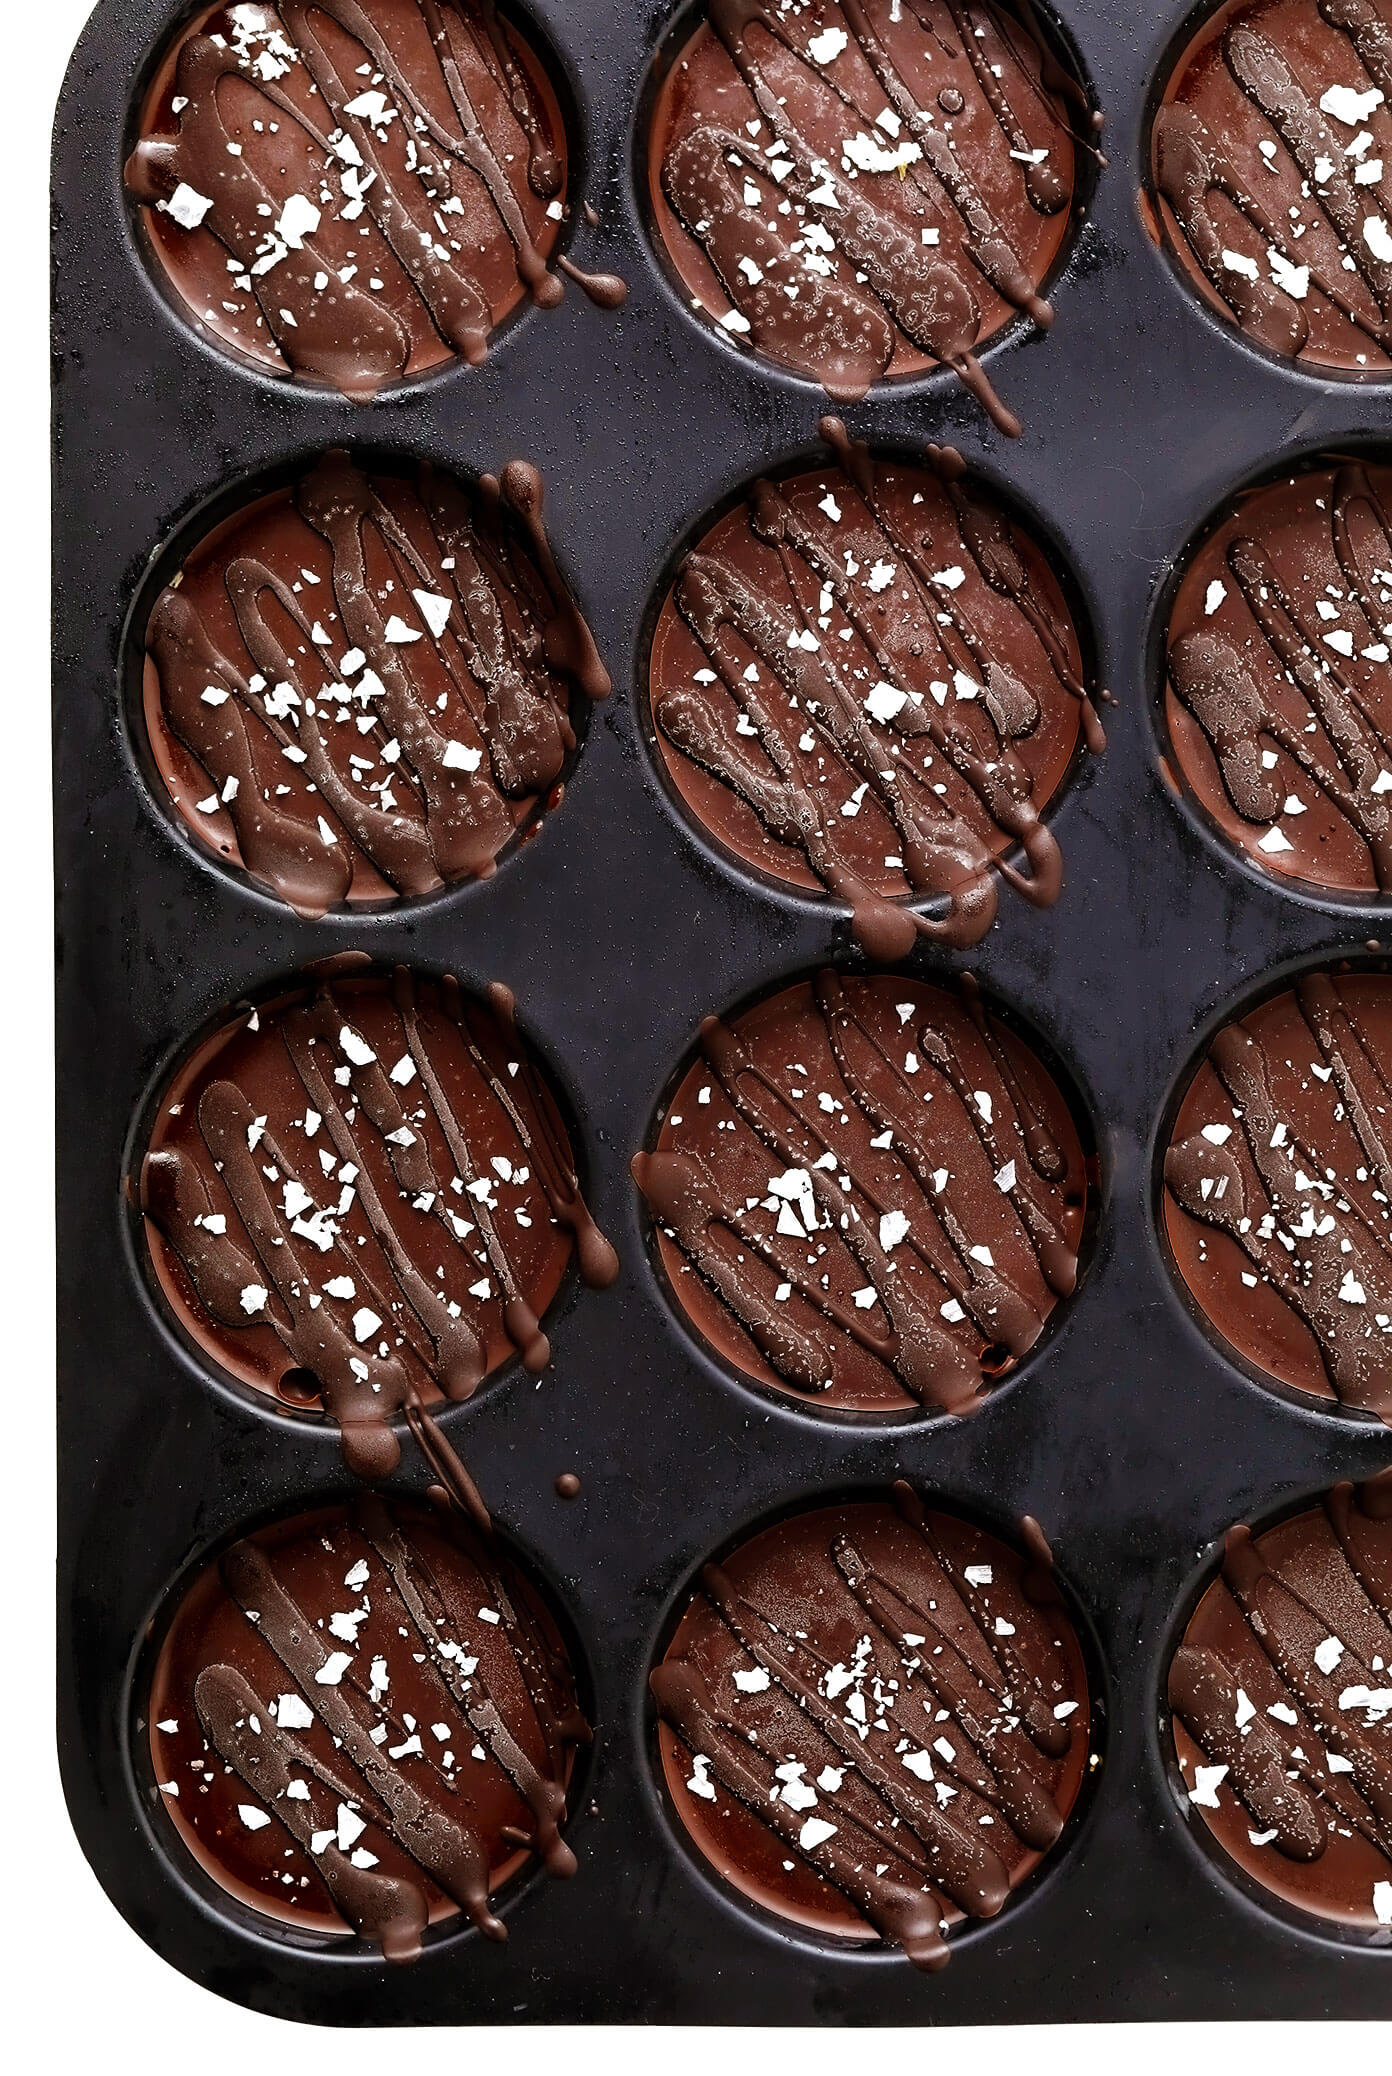 Salted Chocolate Peanut Butter Oat Cups in Pan